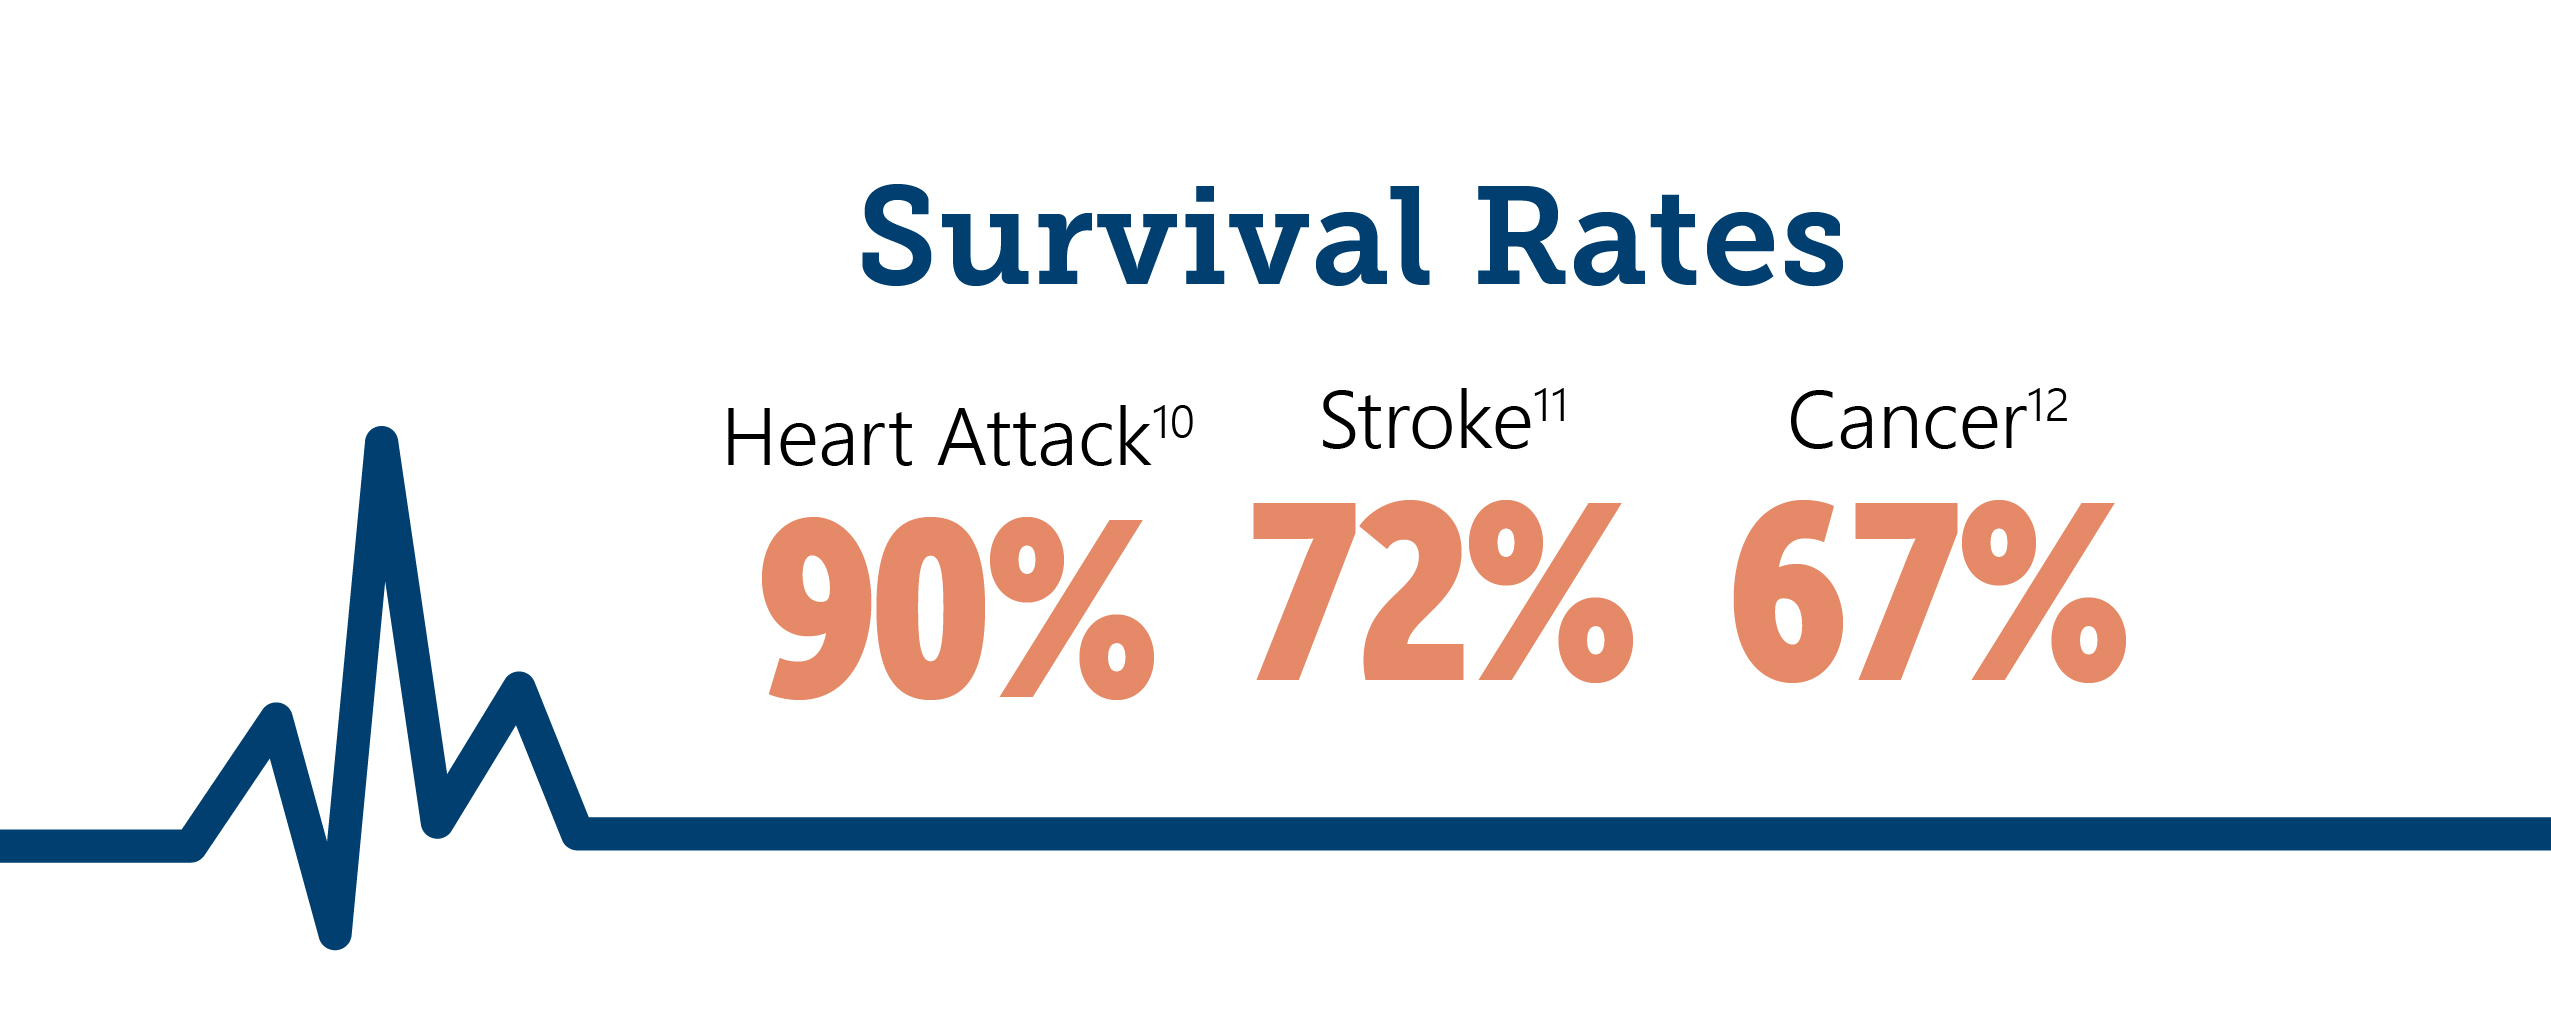 Cancer, Heart Attack and Stroke Survival Rates